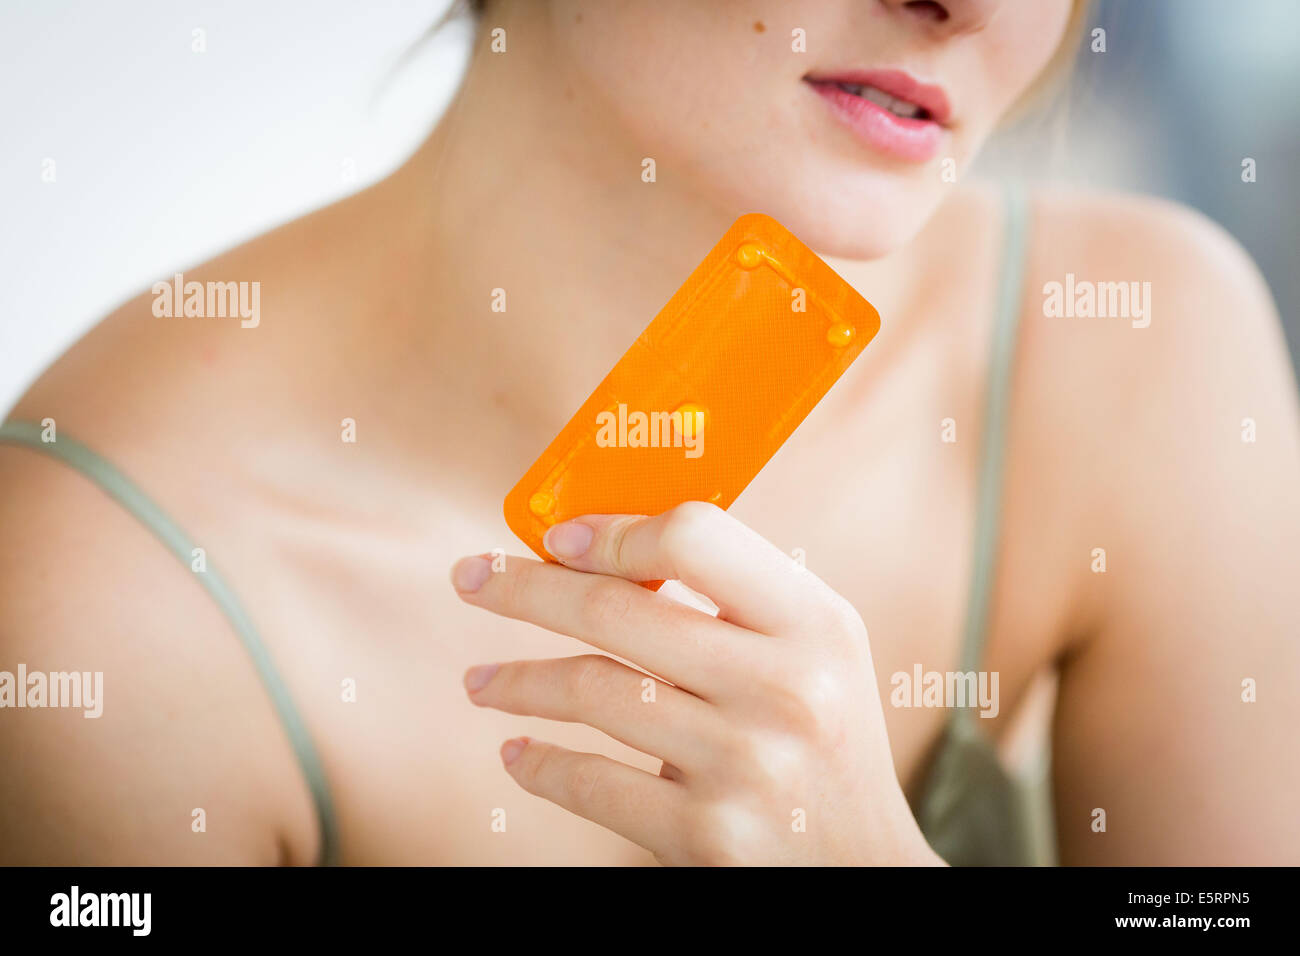 Norlevo ® morning-after pill (emergency contraceptive pill) Stock Photo